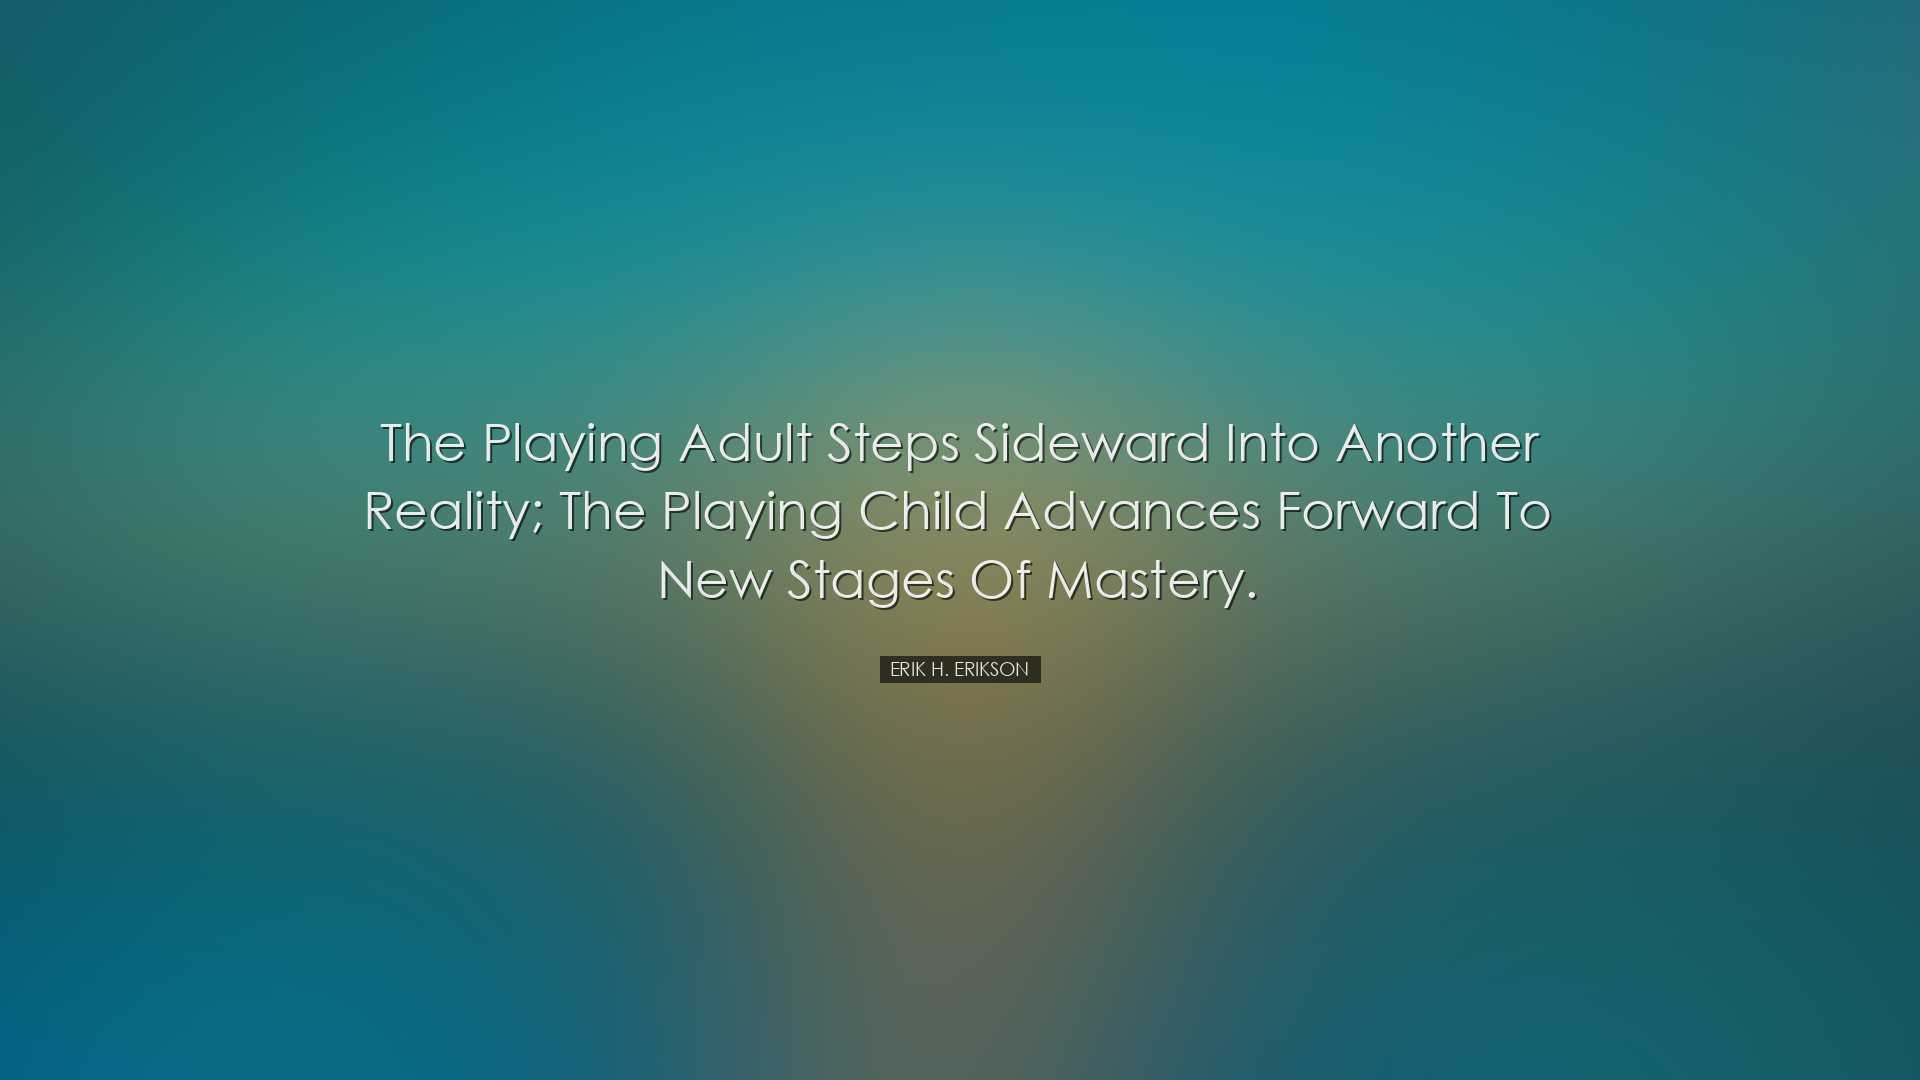 The playing adult steps sideward into another reality; the playing